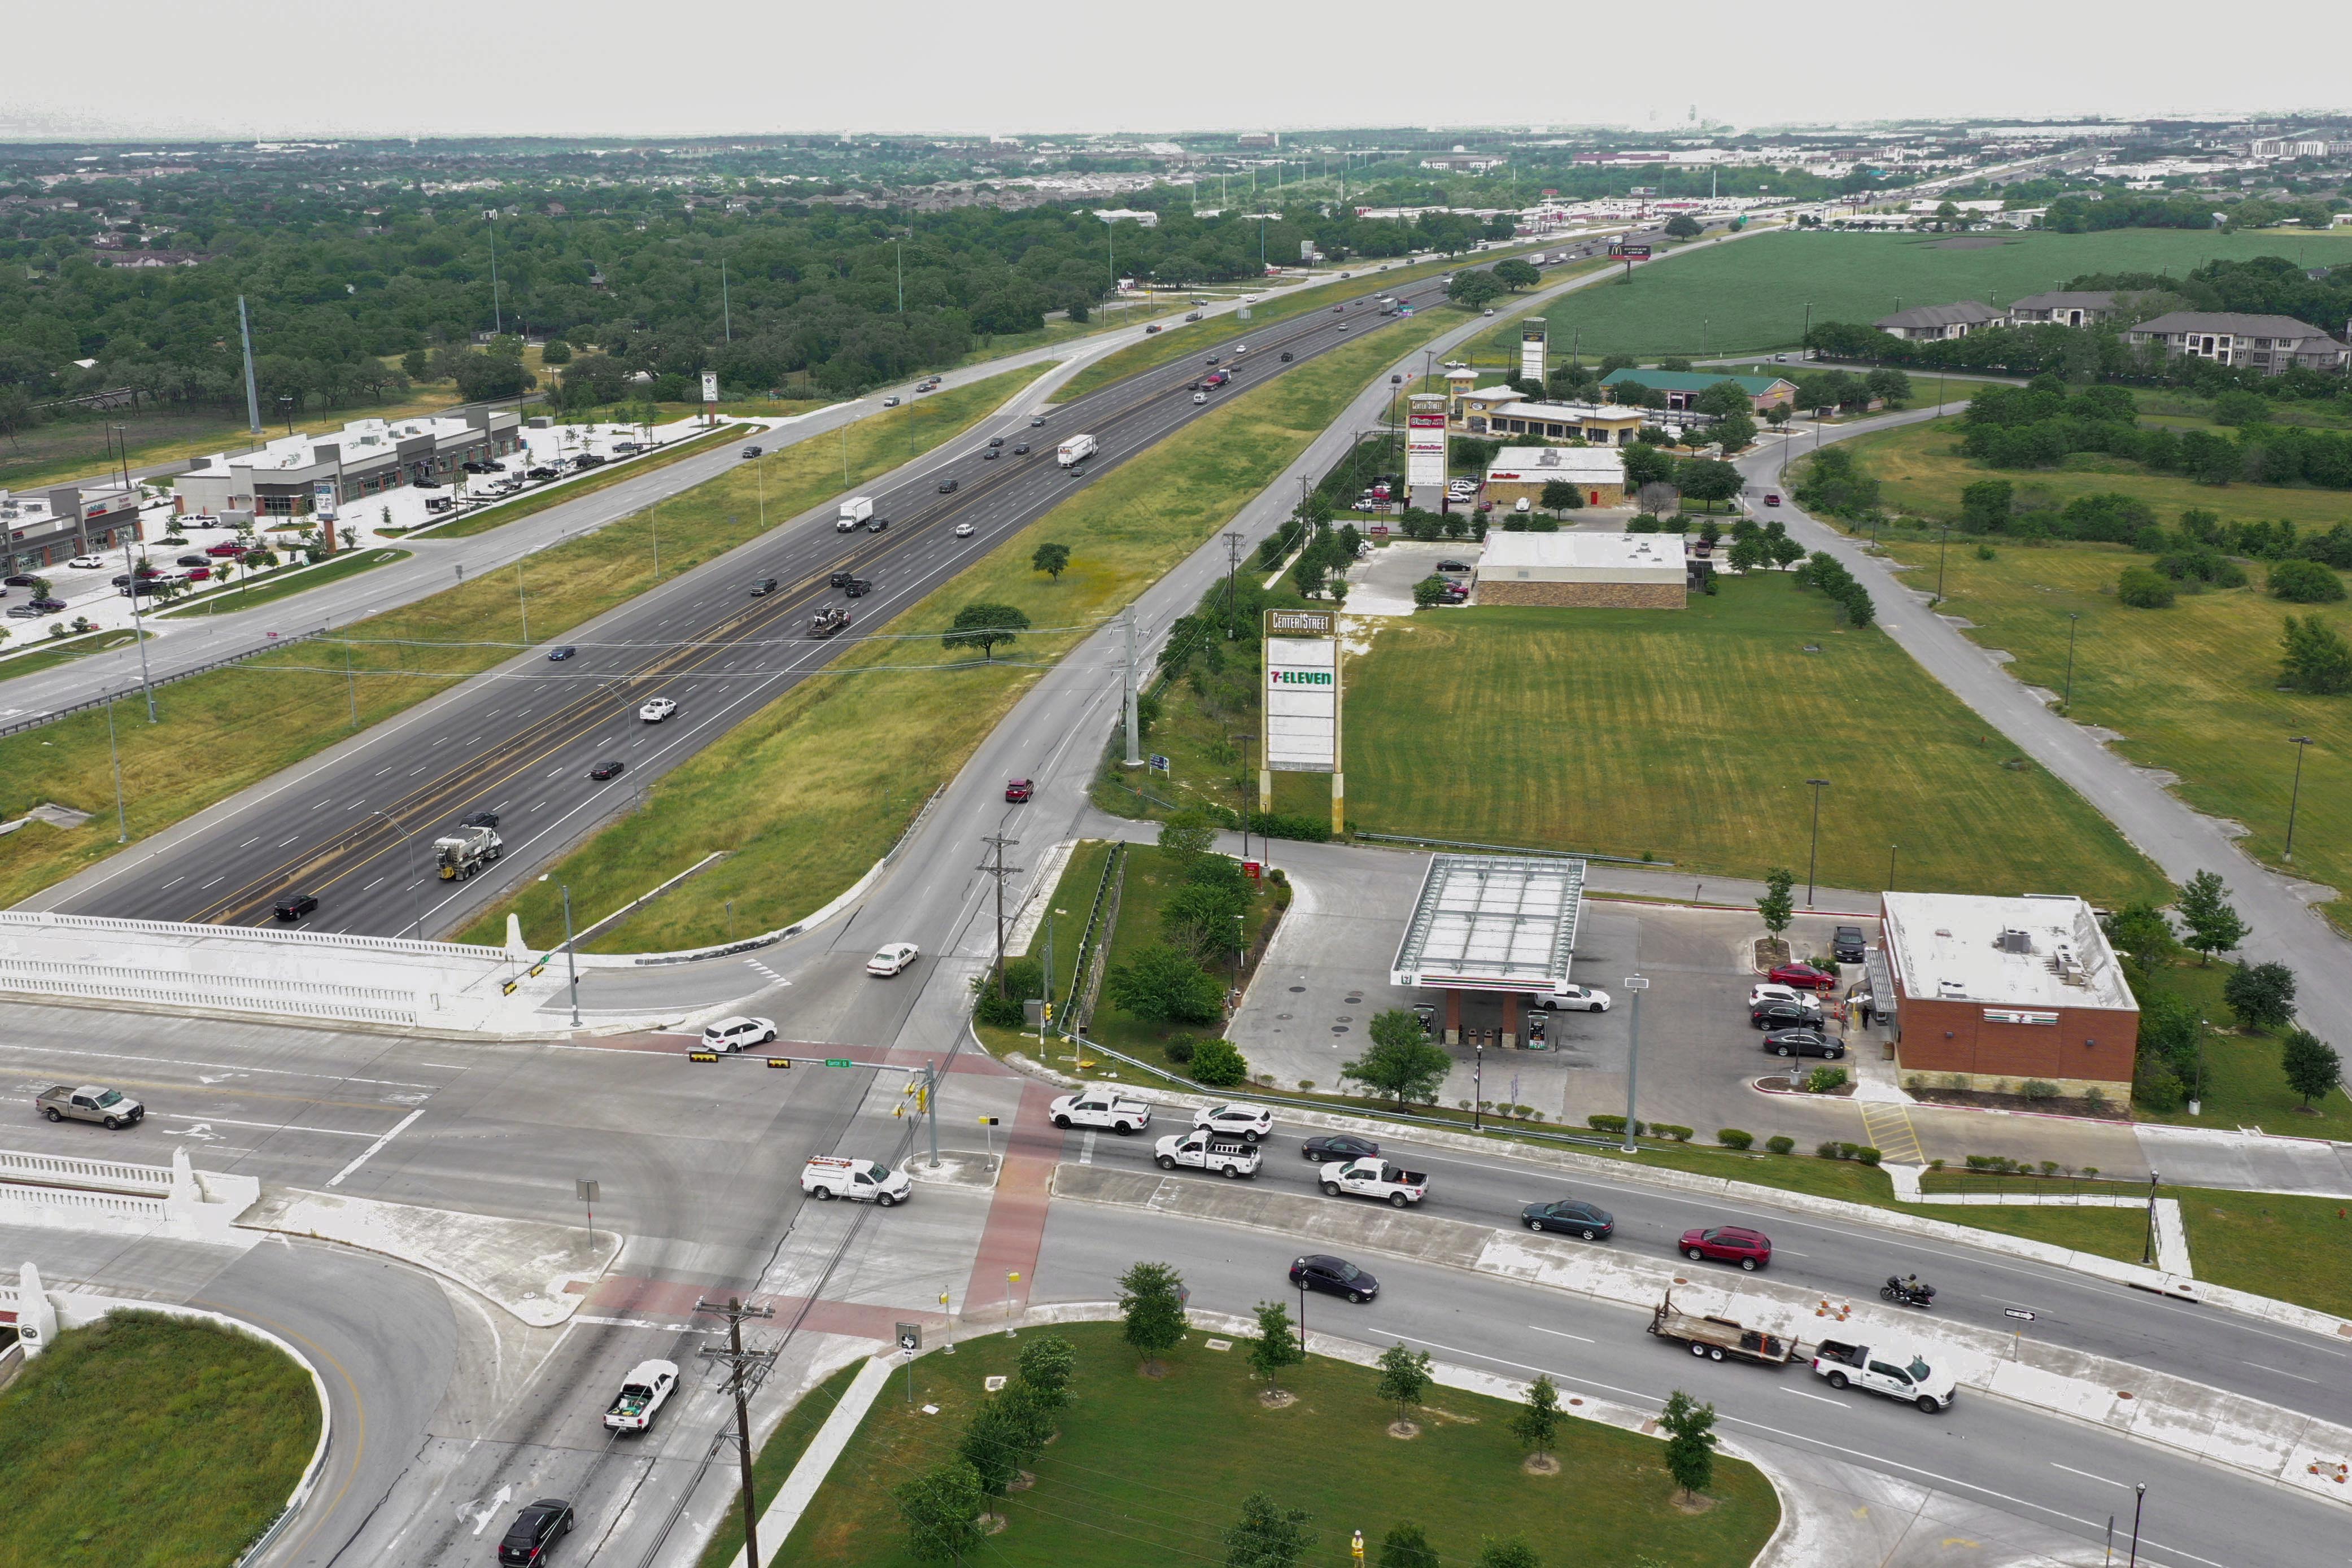 Northbound I-35 frontage road at RM 150 before construction starts